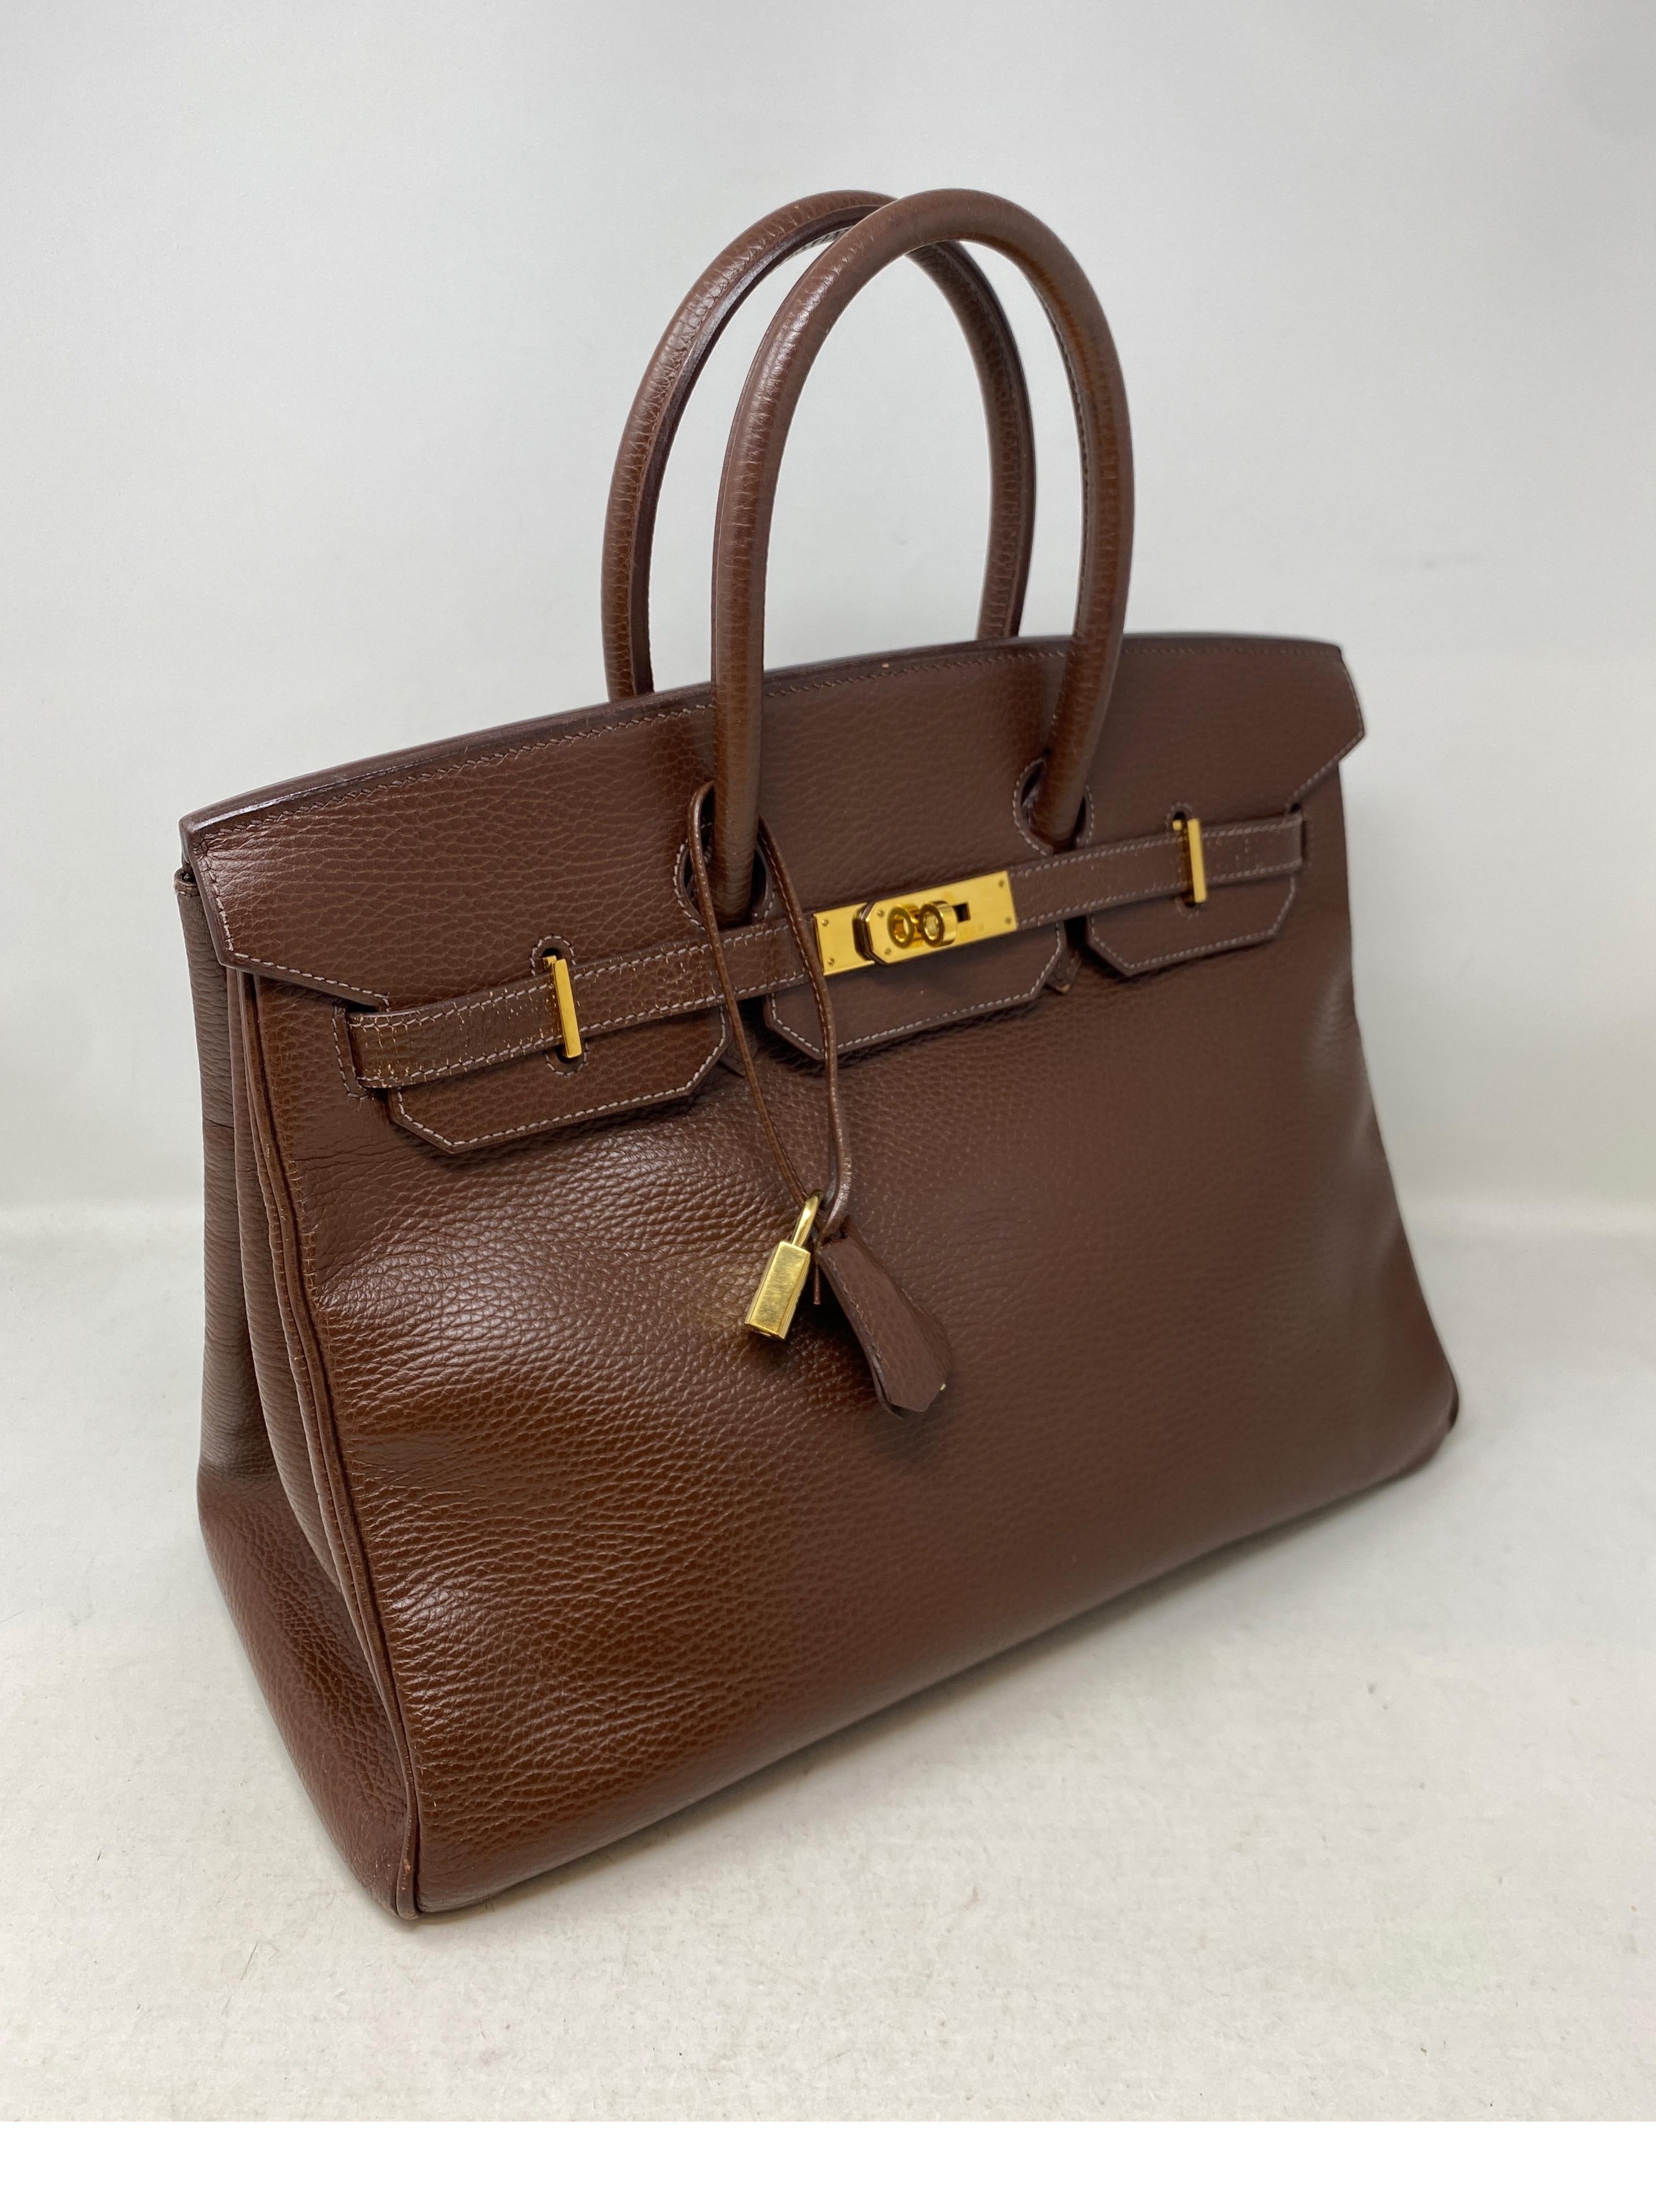 Hermes Brown Birkin Bag. Vintage Ardennes leather Birkin bag. Good condition. Light wear from age. Beautiful vintage Birkin. Gold hardware. Priced to sell. Size 35 classic. Includes clochette, lock, keys, and dust bag. Guaranteed authentic. 